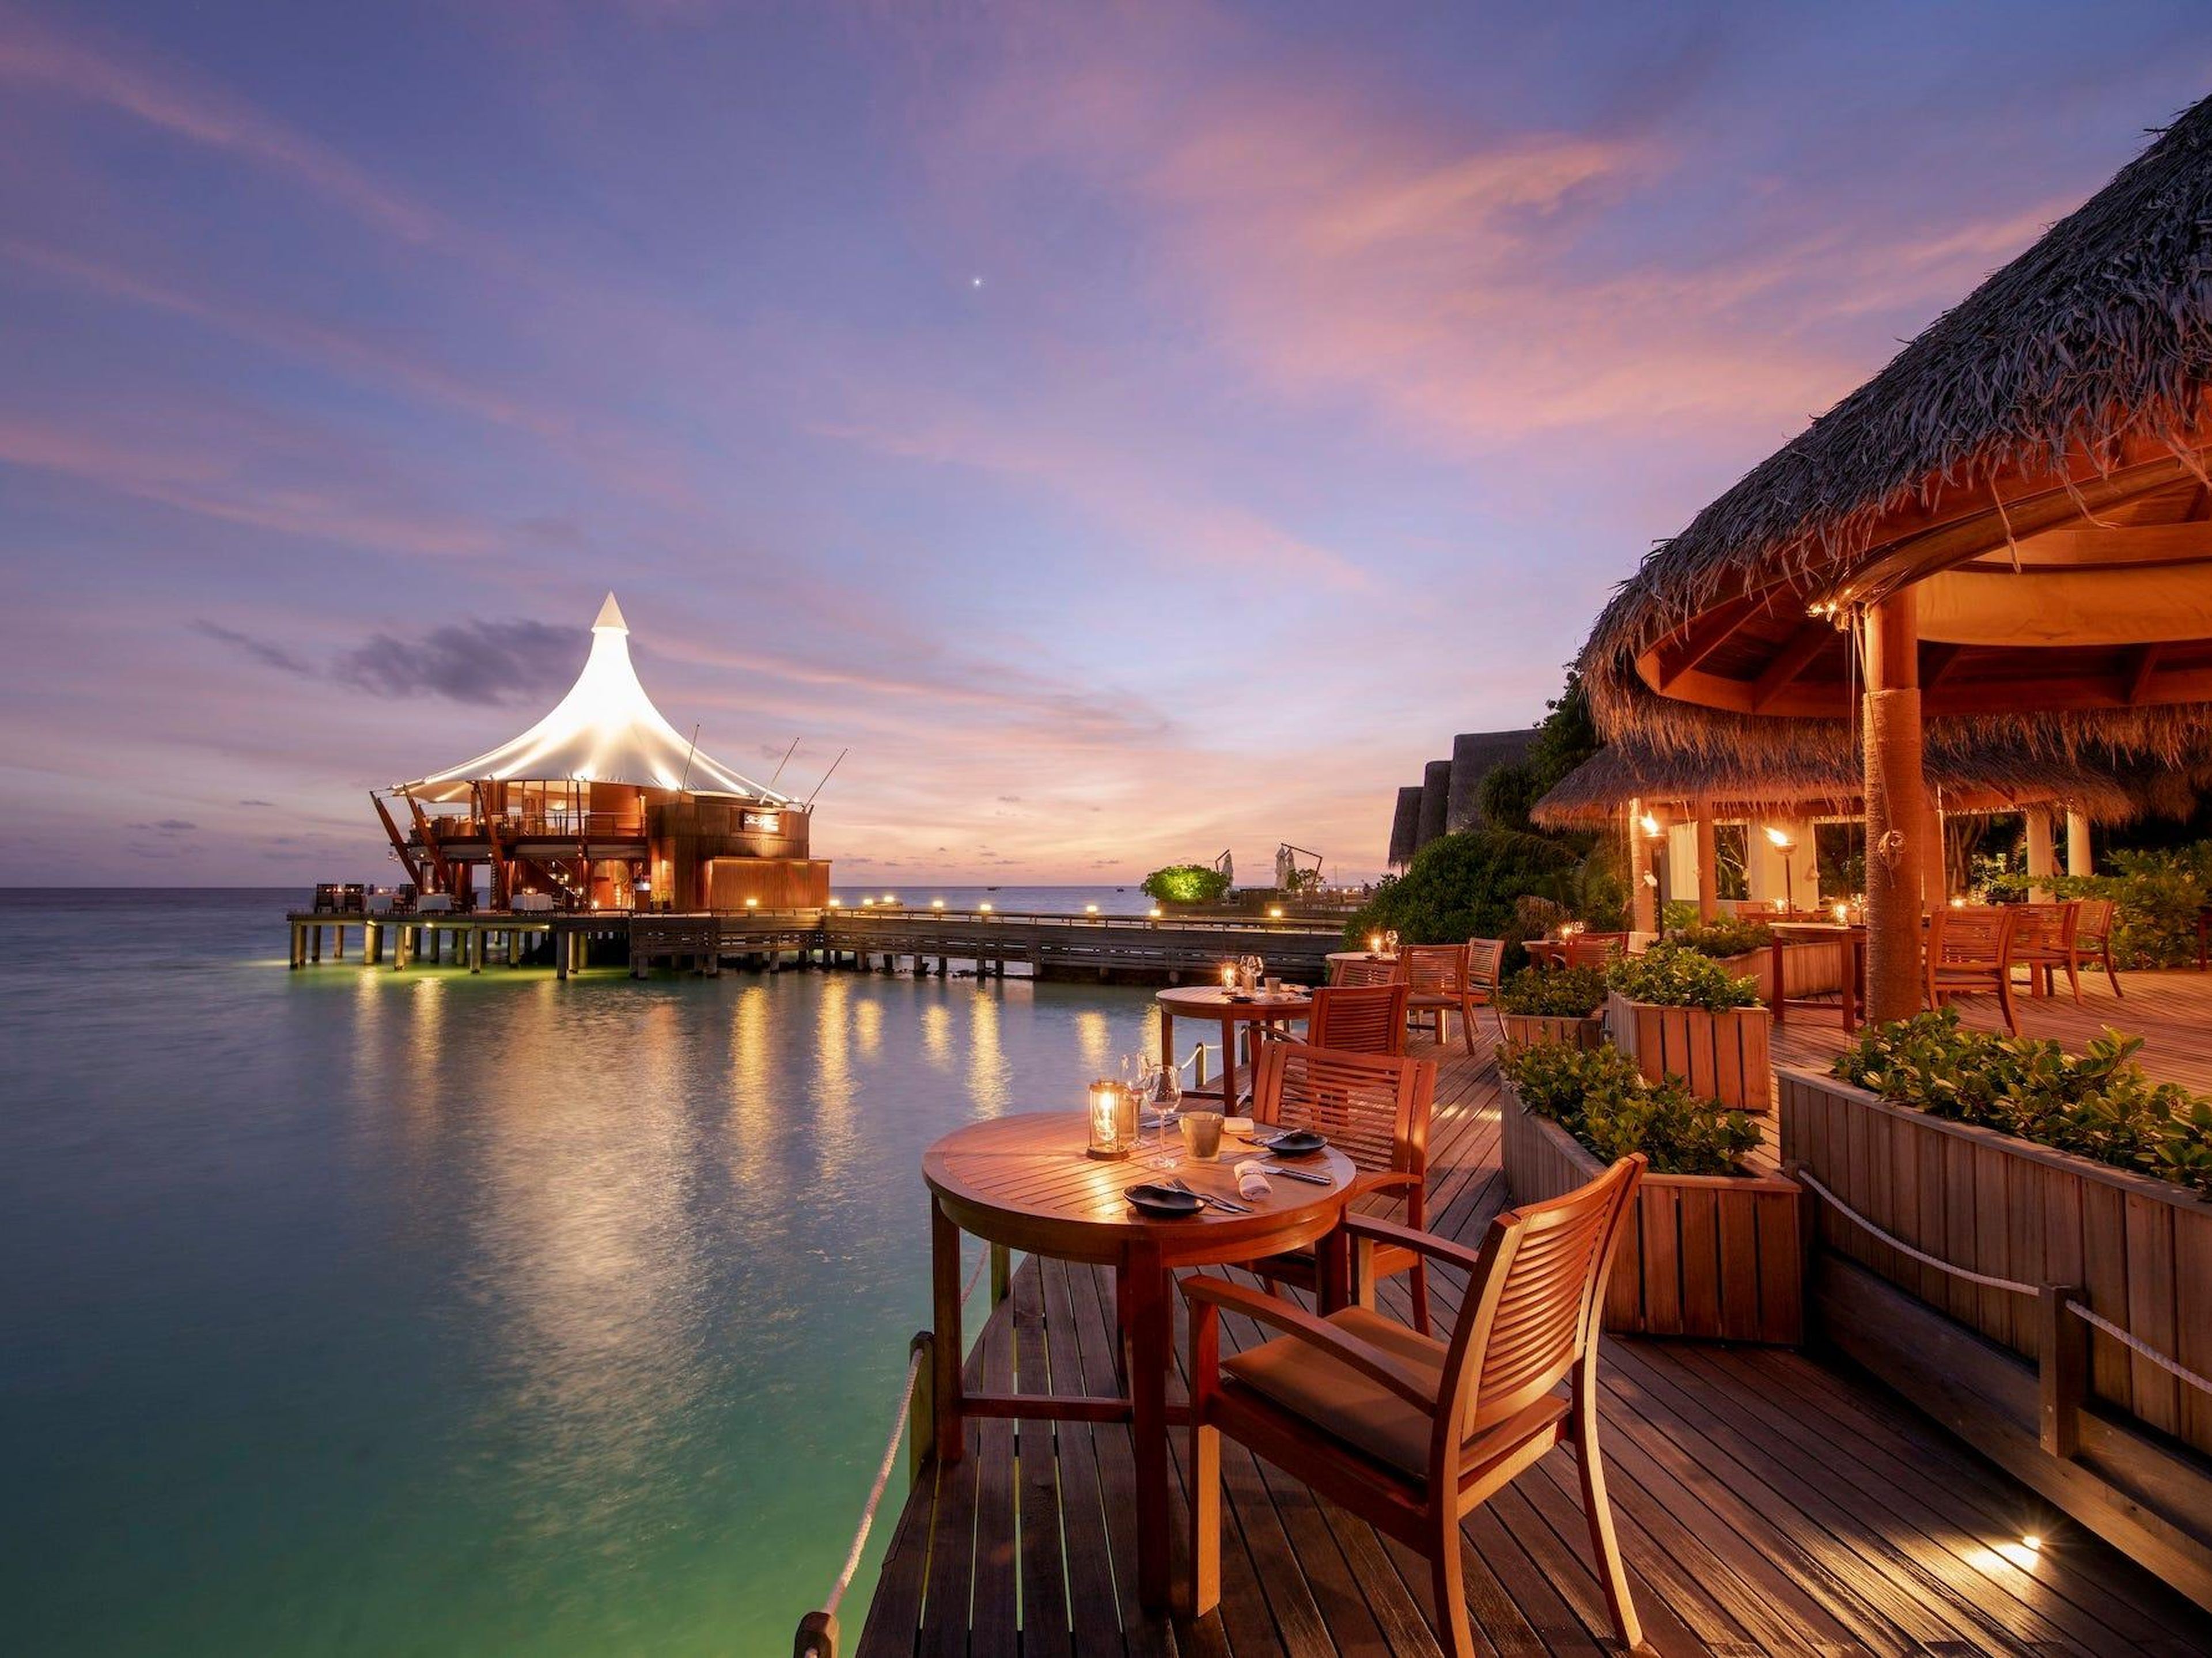 Baros opened more than 47 years ago, making it one of the first resorts to open in the Maldives.